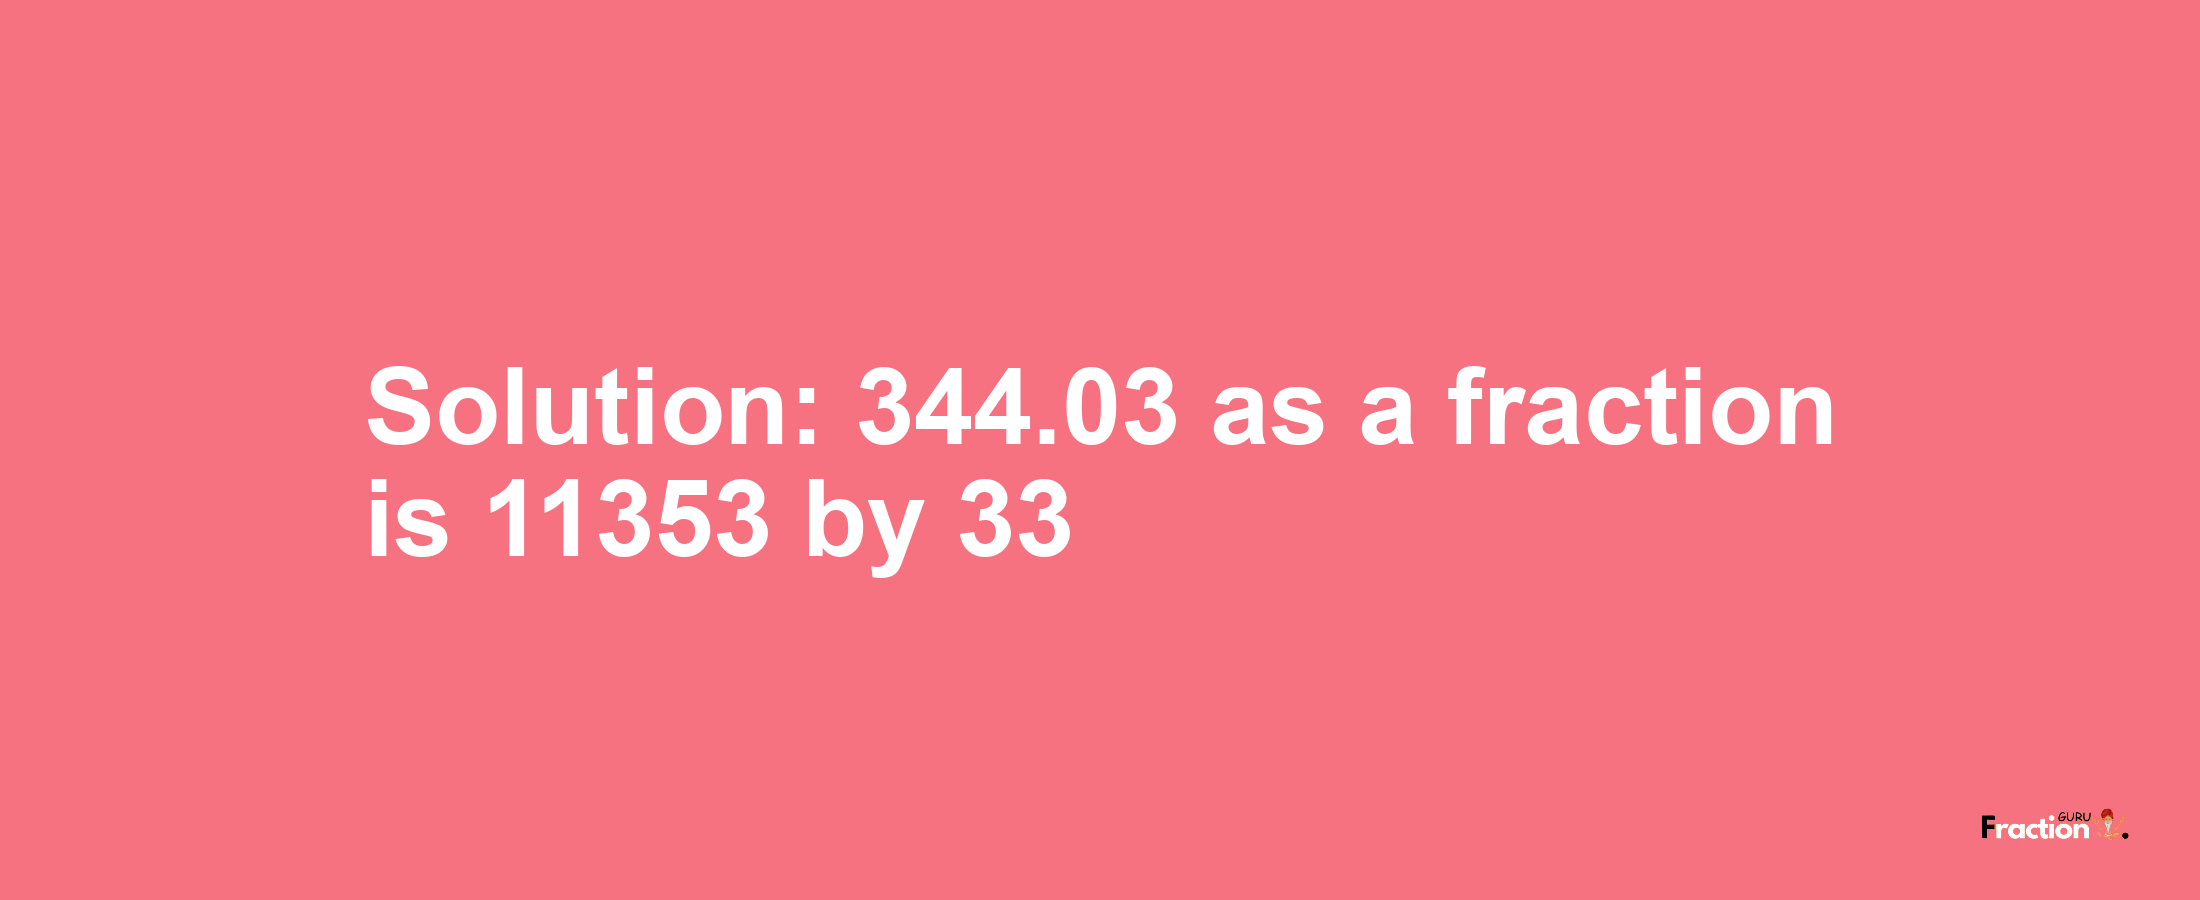 Solution:344.03 as a fraction is 11353/33